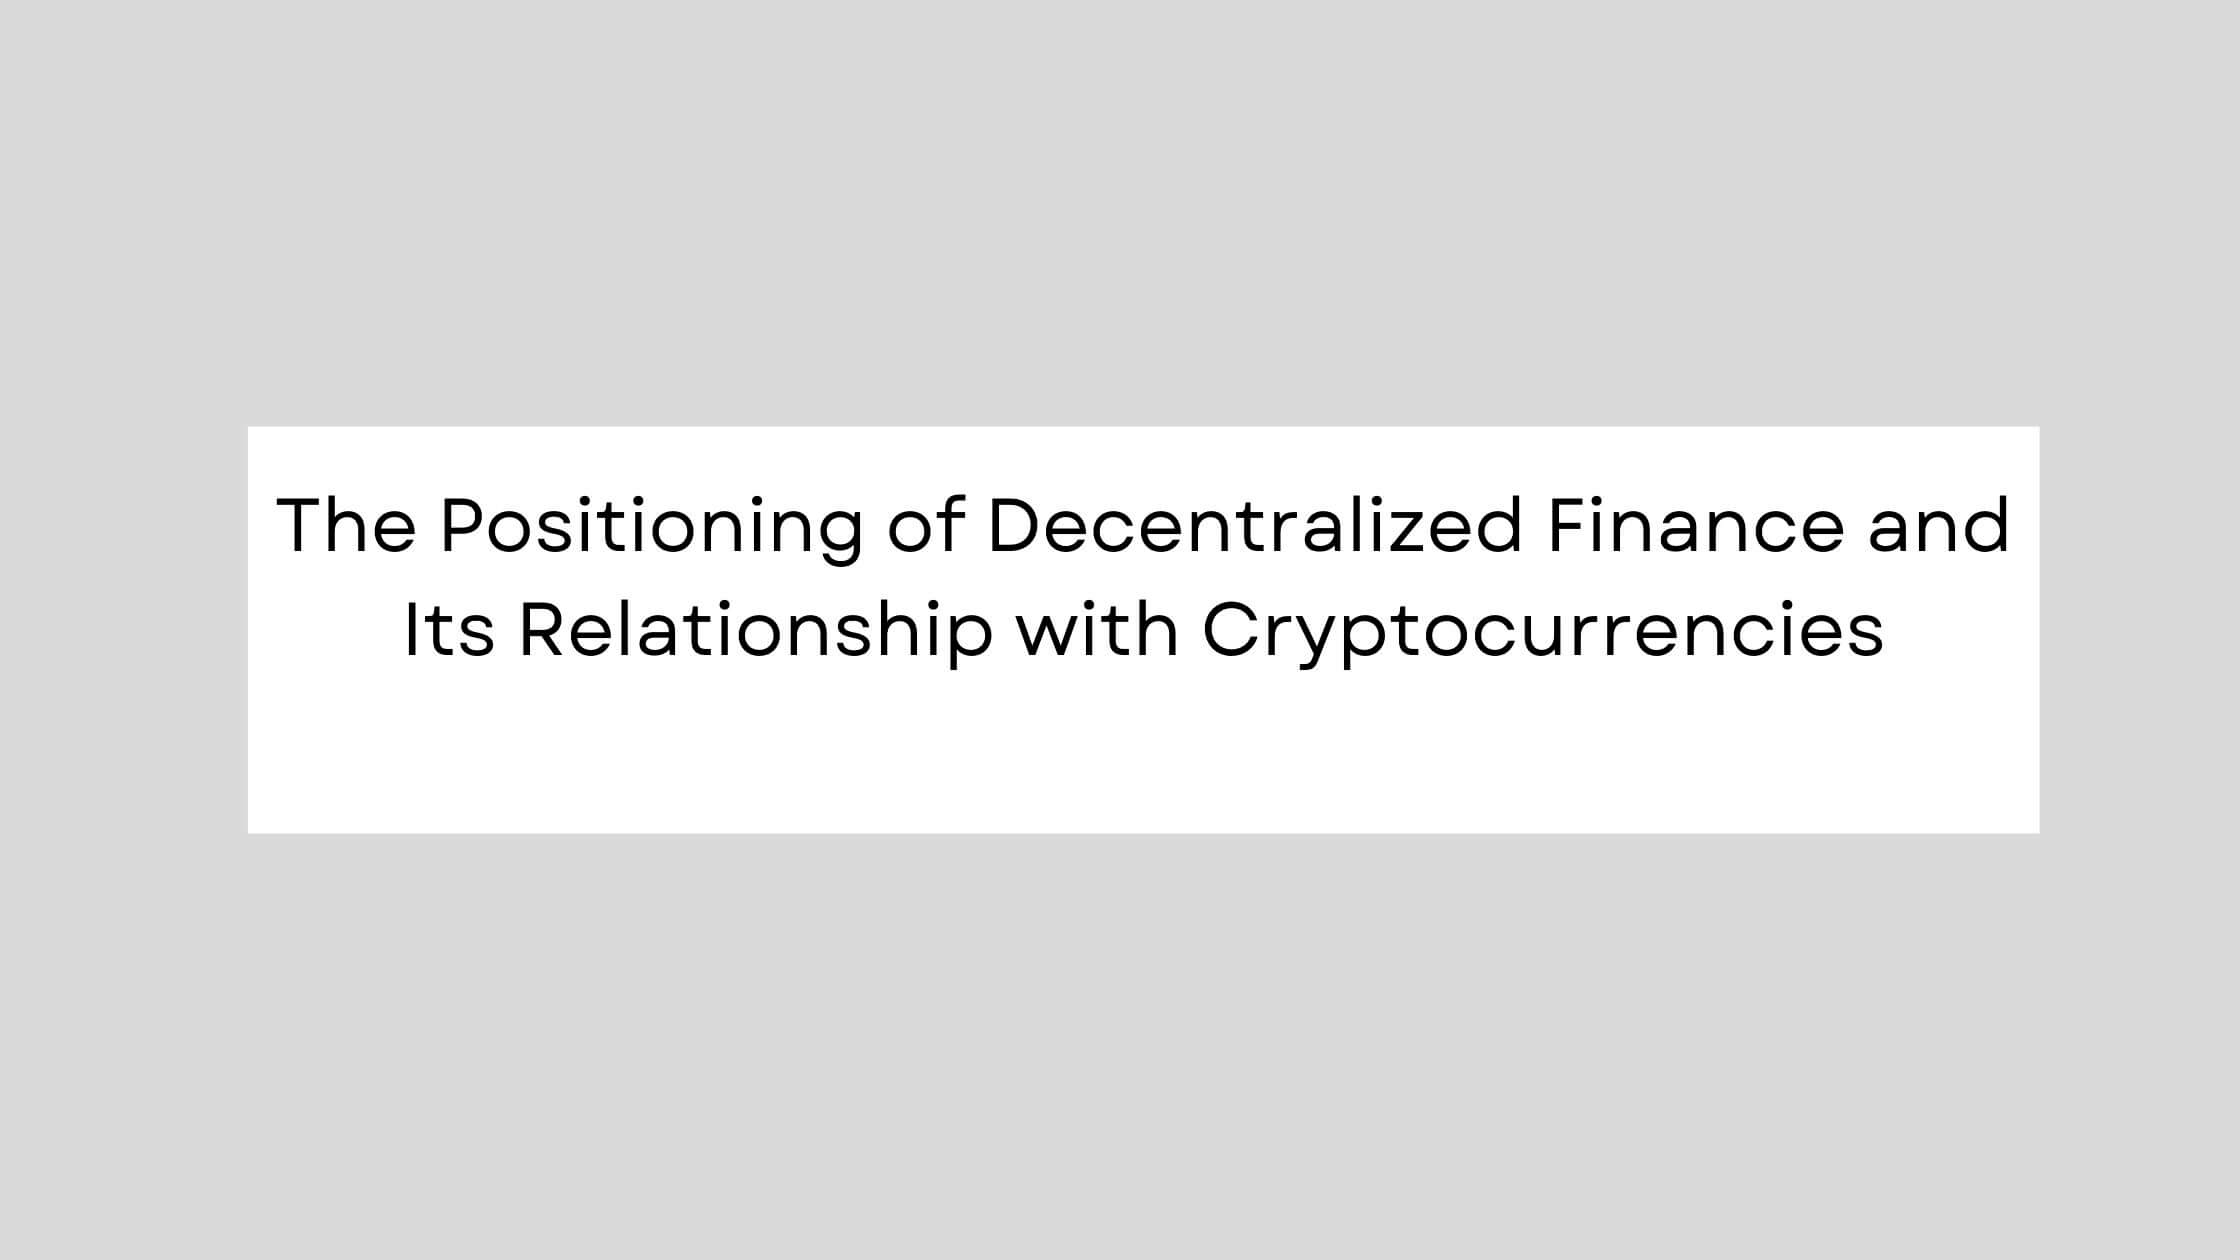 The Positioning of Decentralized Finance and Its Relationship with Cryptocurrencies